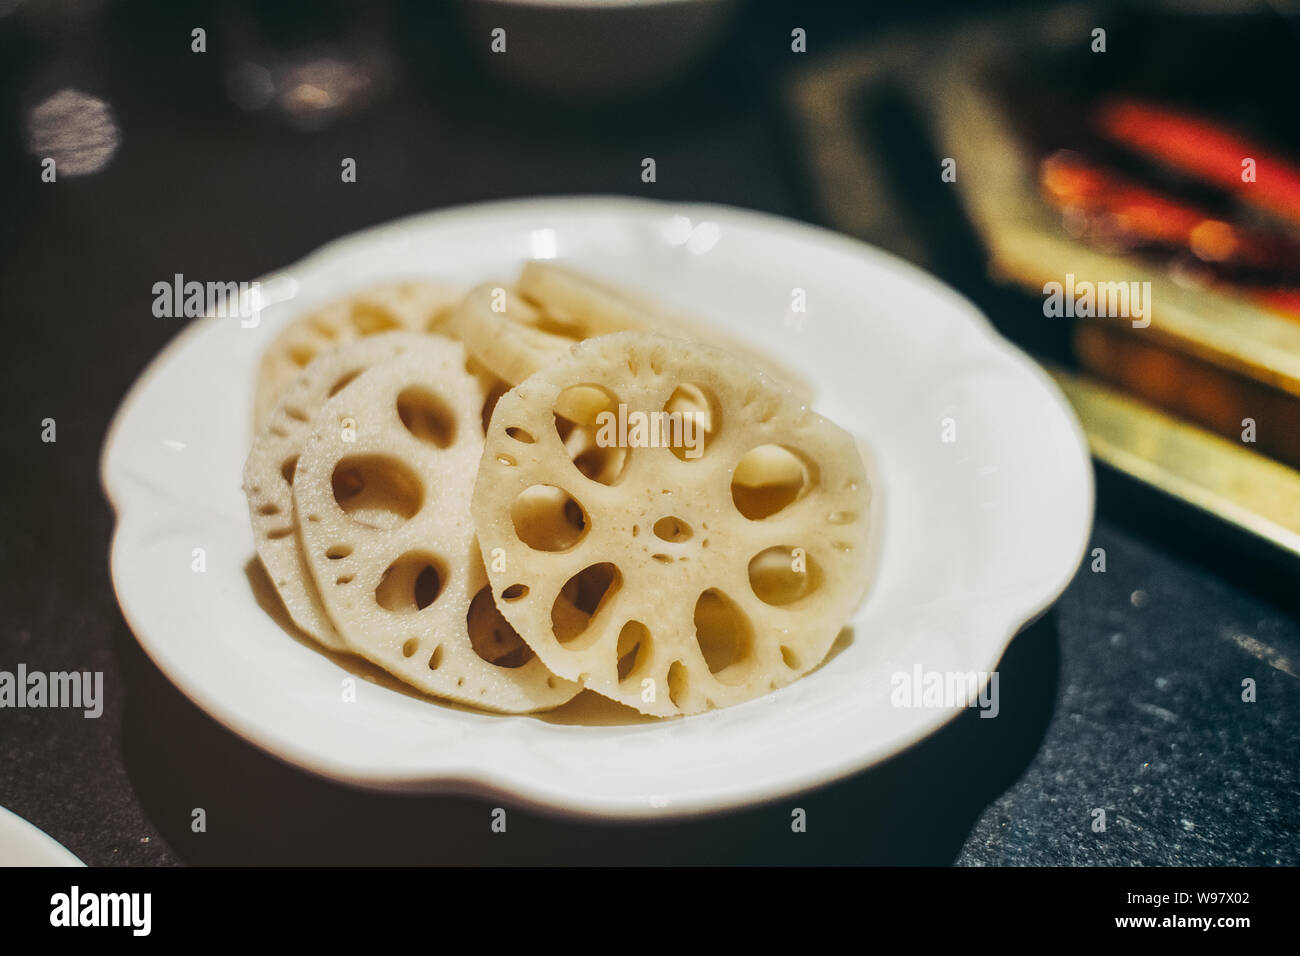 Lotus roots for chinese hot pot, with mala spicy soup Stock Photo